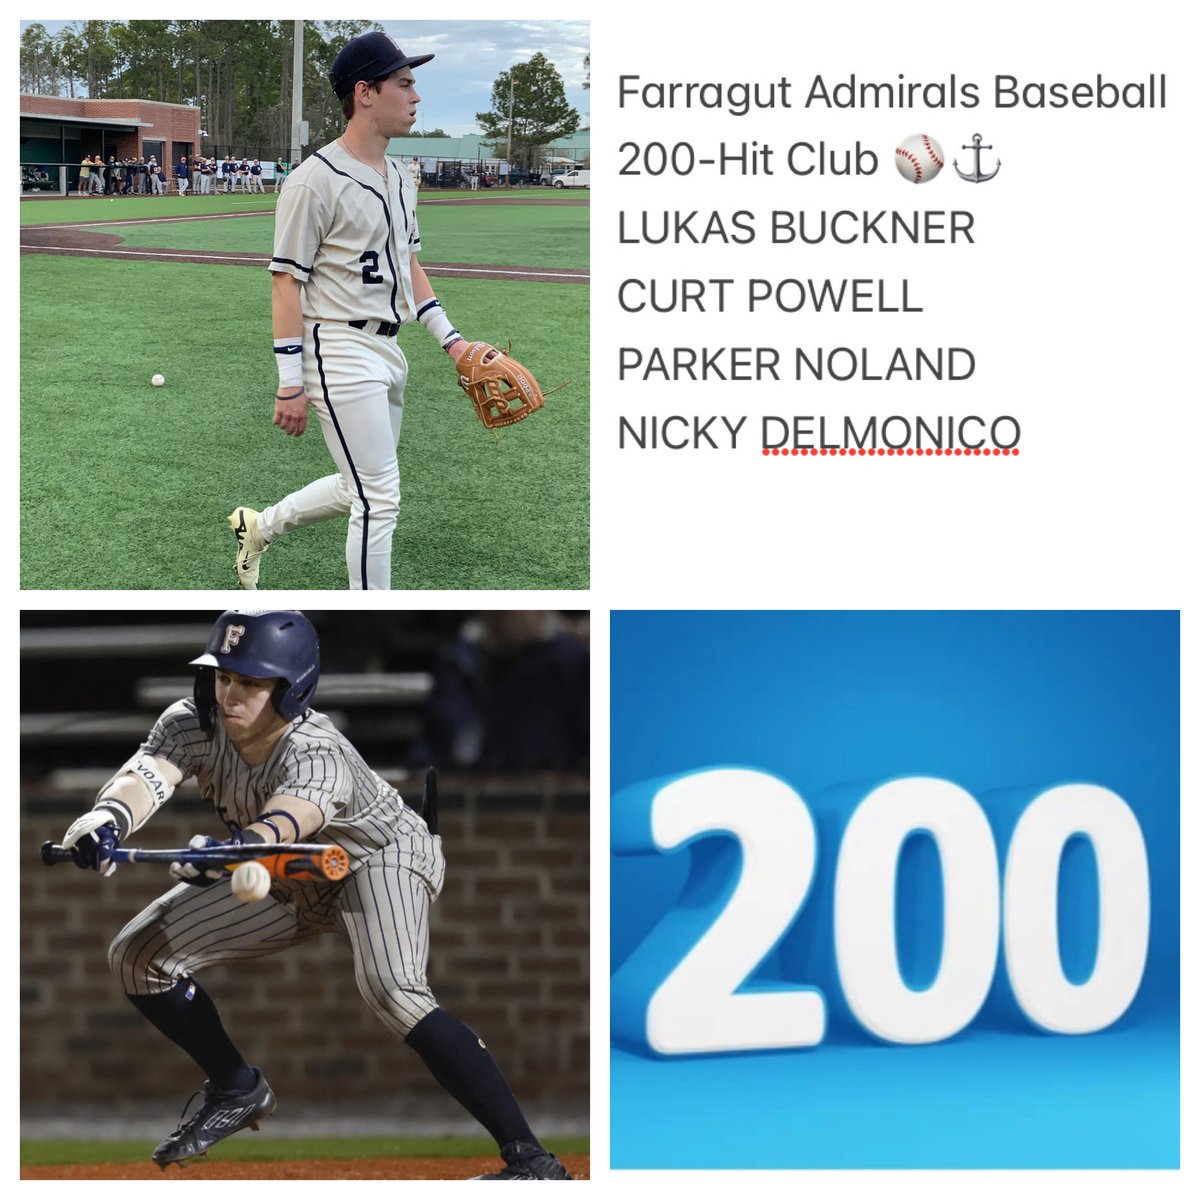 With his 2nd Inning Single this morning vs #1 Hartselle, Farragut Senior shortstop LUKAS BUCKNER joins the exclusive 2️⃣0️⃣0️⃣ CAREER HIT CLUB for the Admirals! ⚓️ Other members are CURT POWELL, PARKER NOLAND, & NICKY DELMONICO ⚾️ Congratulations LUKAS! 200 ⁦@AdmiralGameday⁩